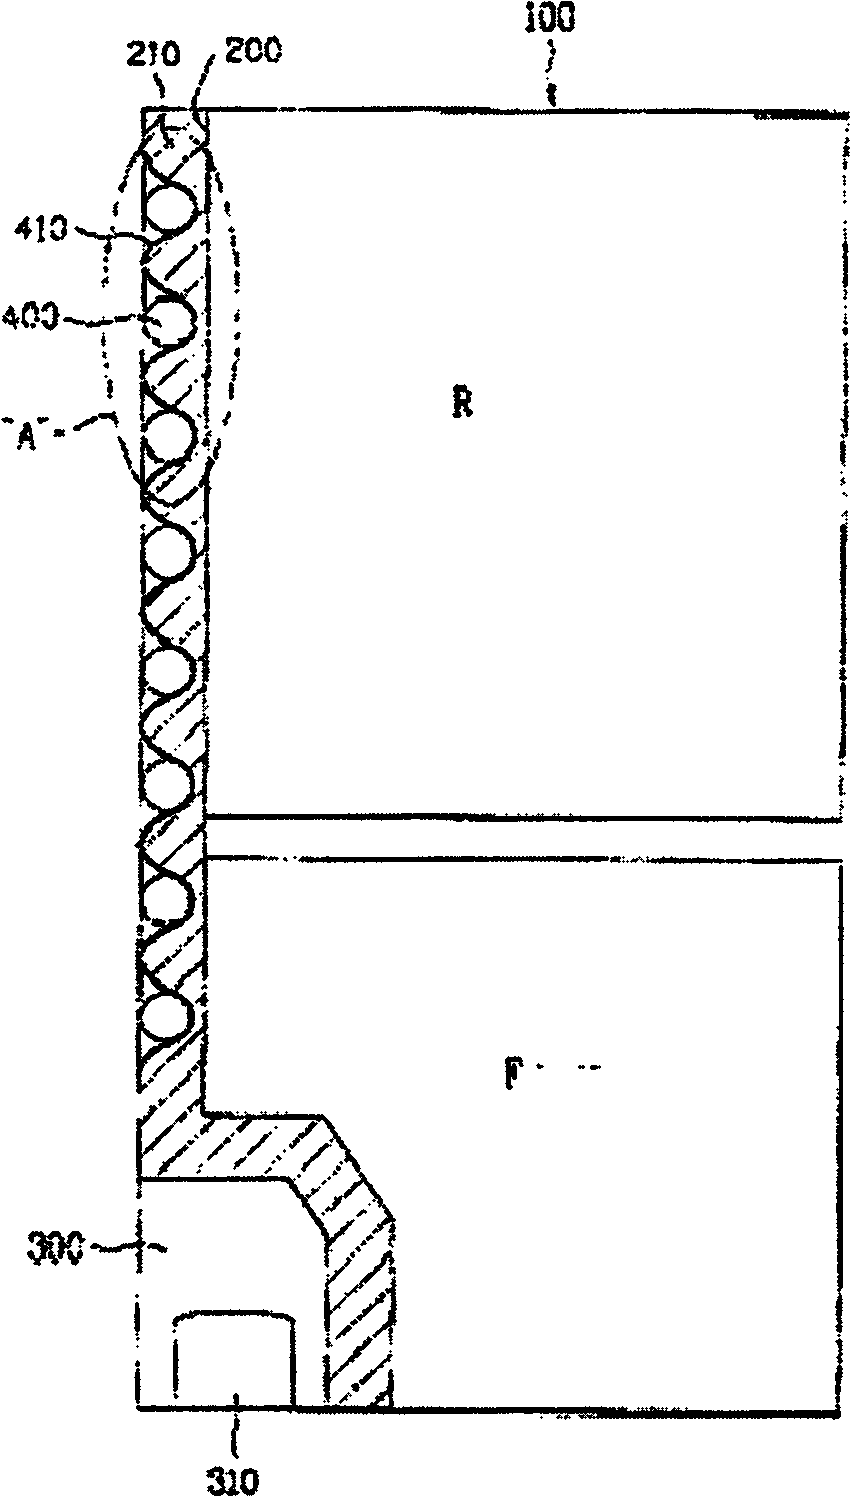 Heat release structure of direct cooling refrigerator